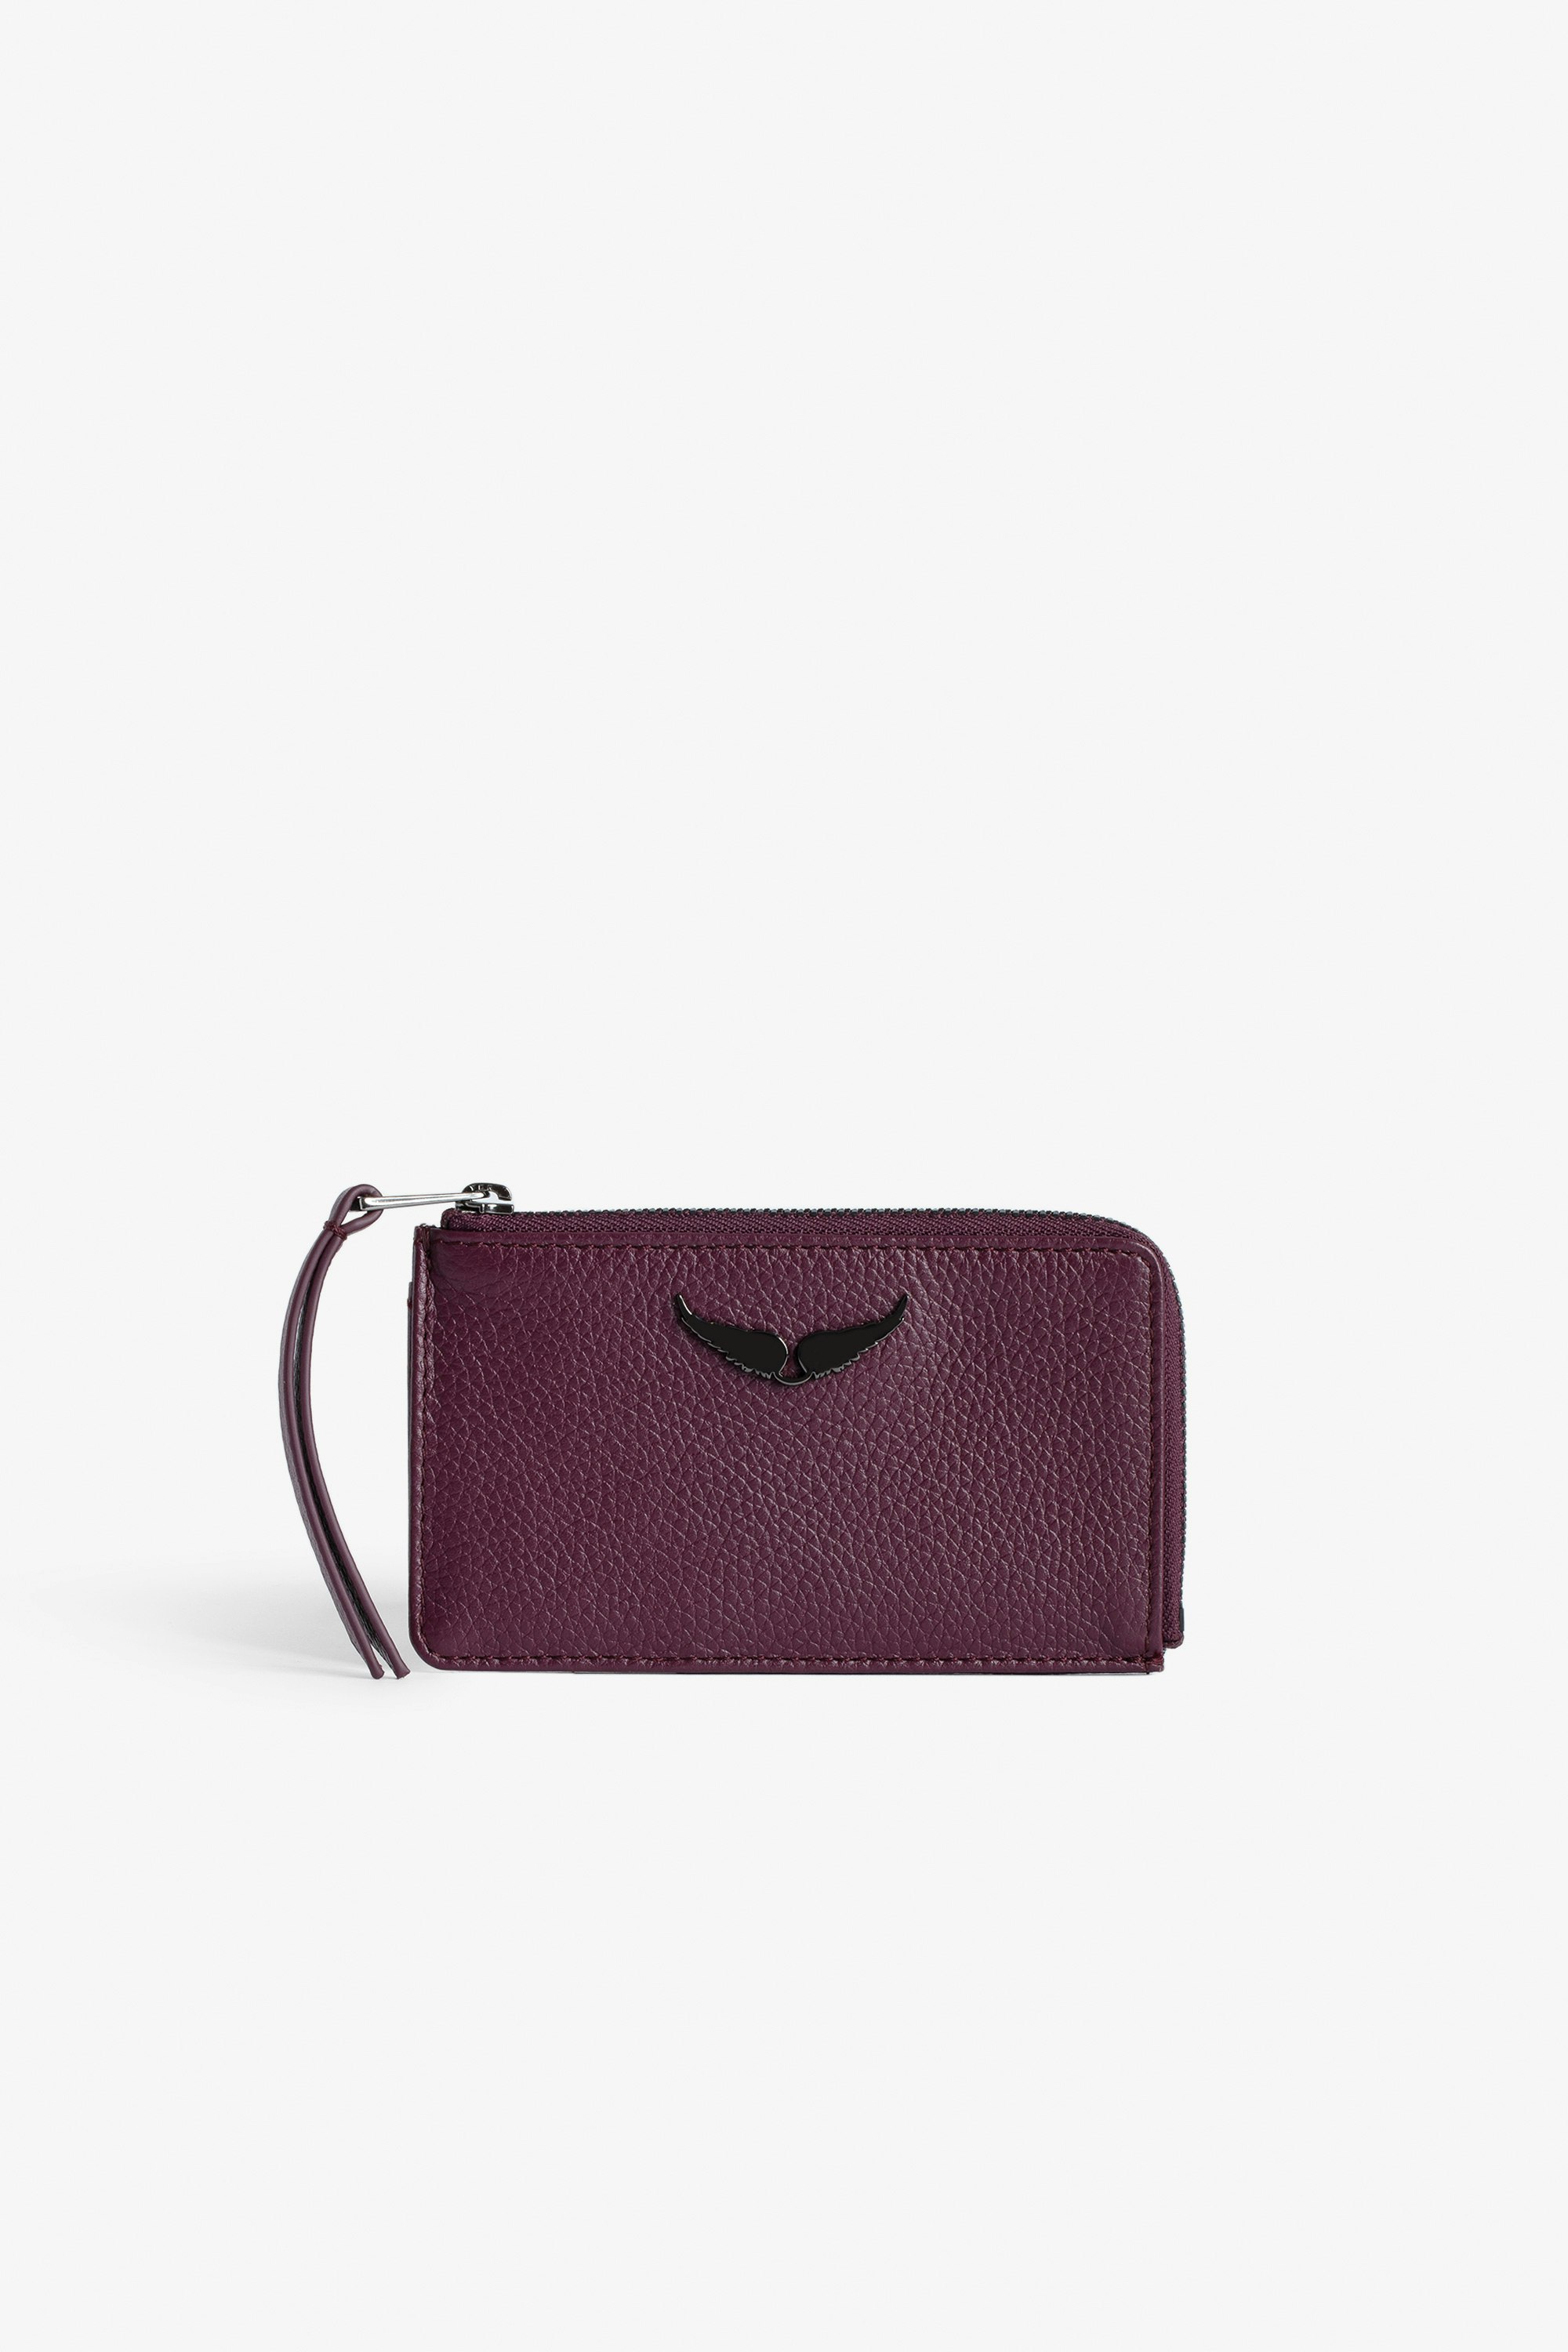 ZV Card Card Holder - Women’s burgundy grained leather card holder with wings charm.